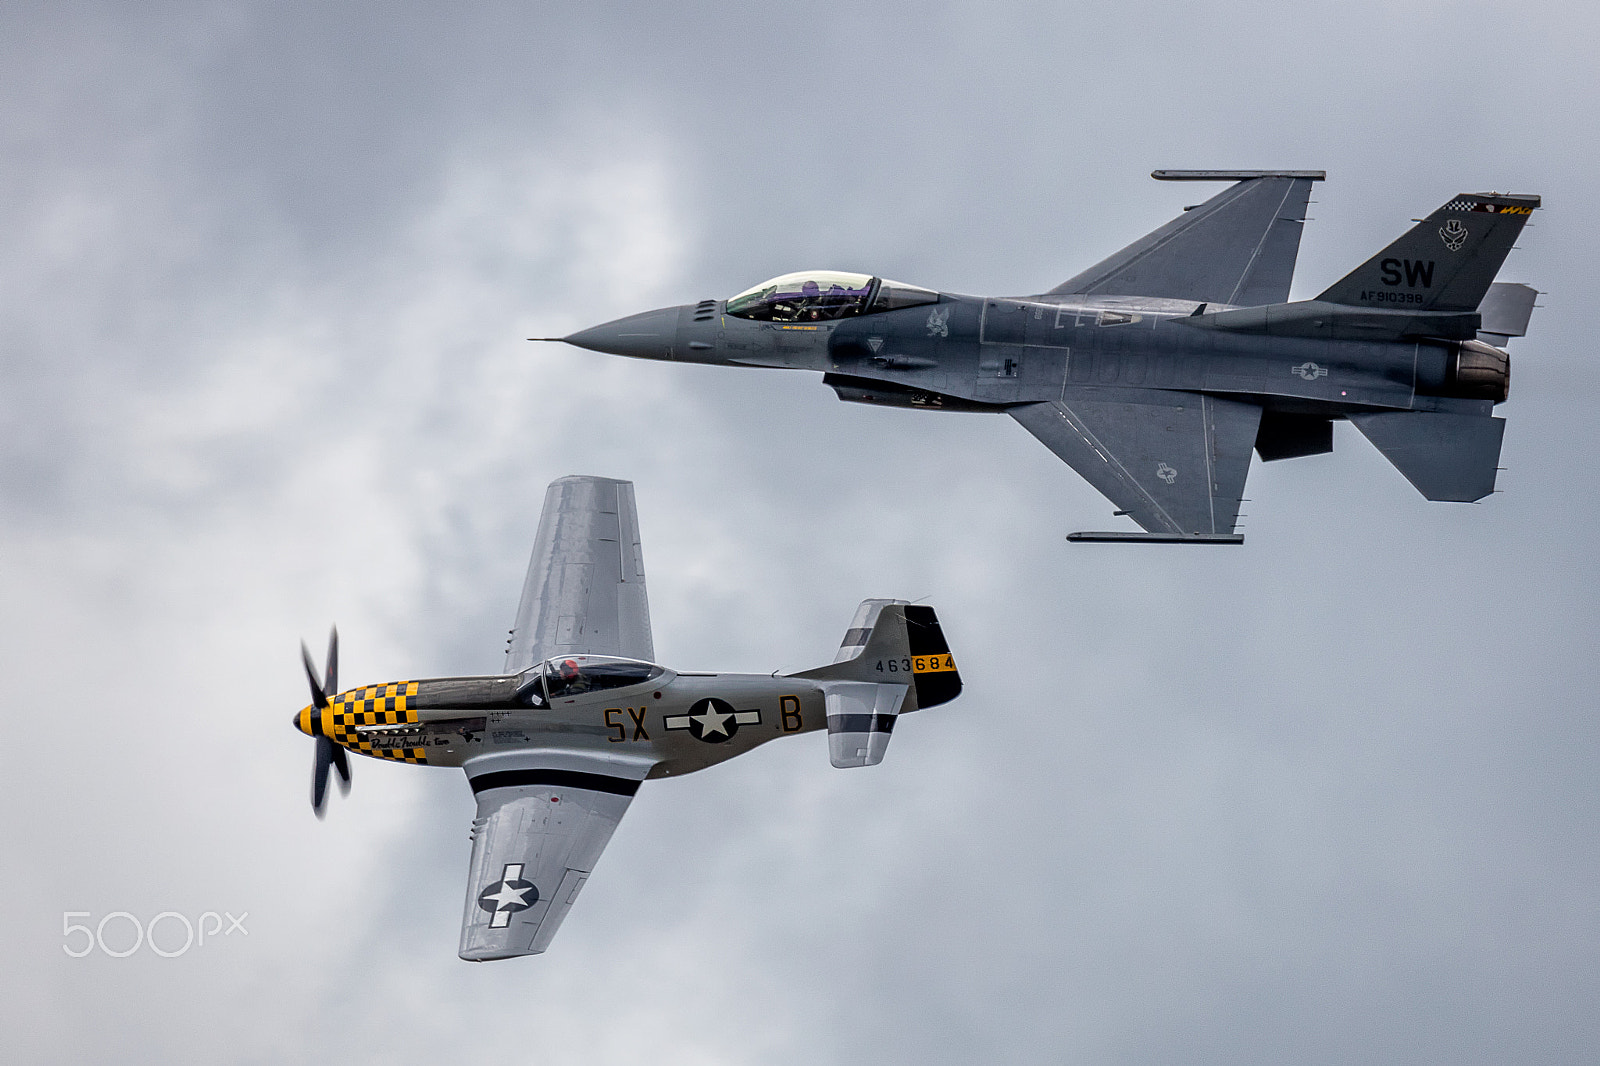 Canon EOS 5DS sample photo. P-51 mustang and f-16 fighting falcon in flight photography